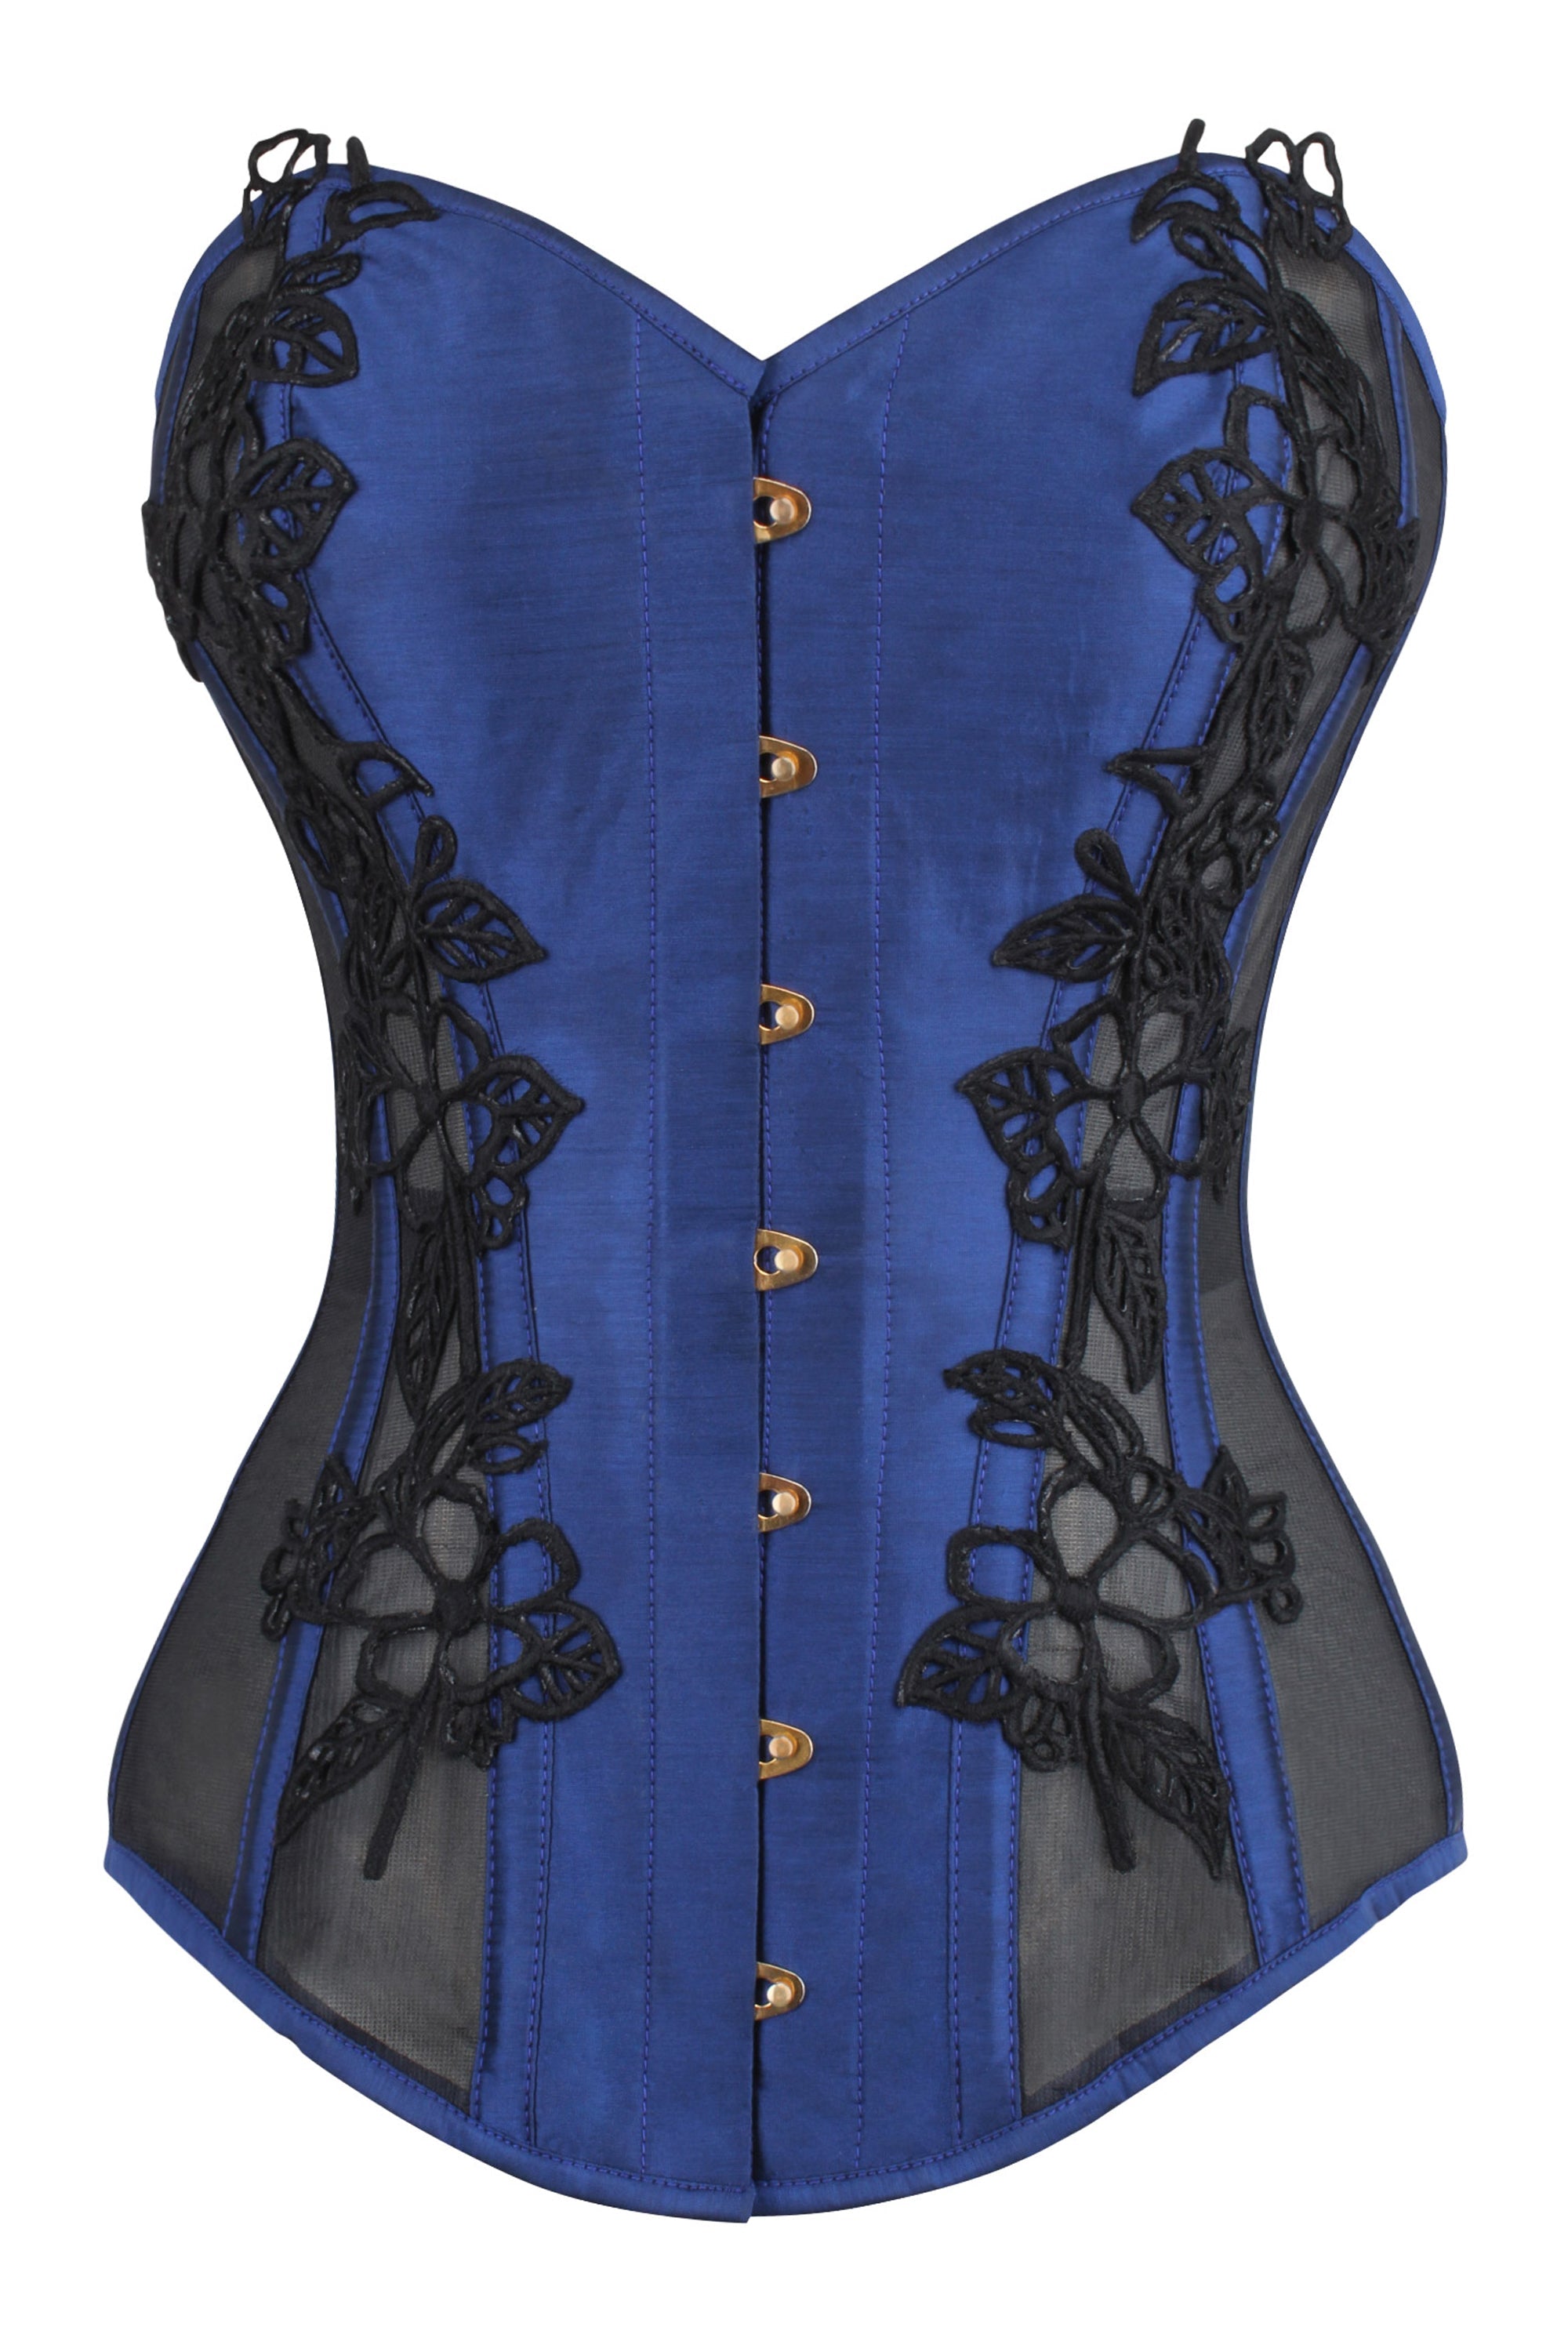 Navy Blue Longline Overbust Corset with Black Lace and Mesh